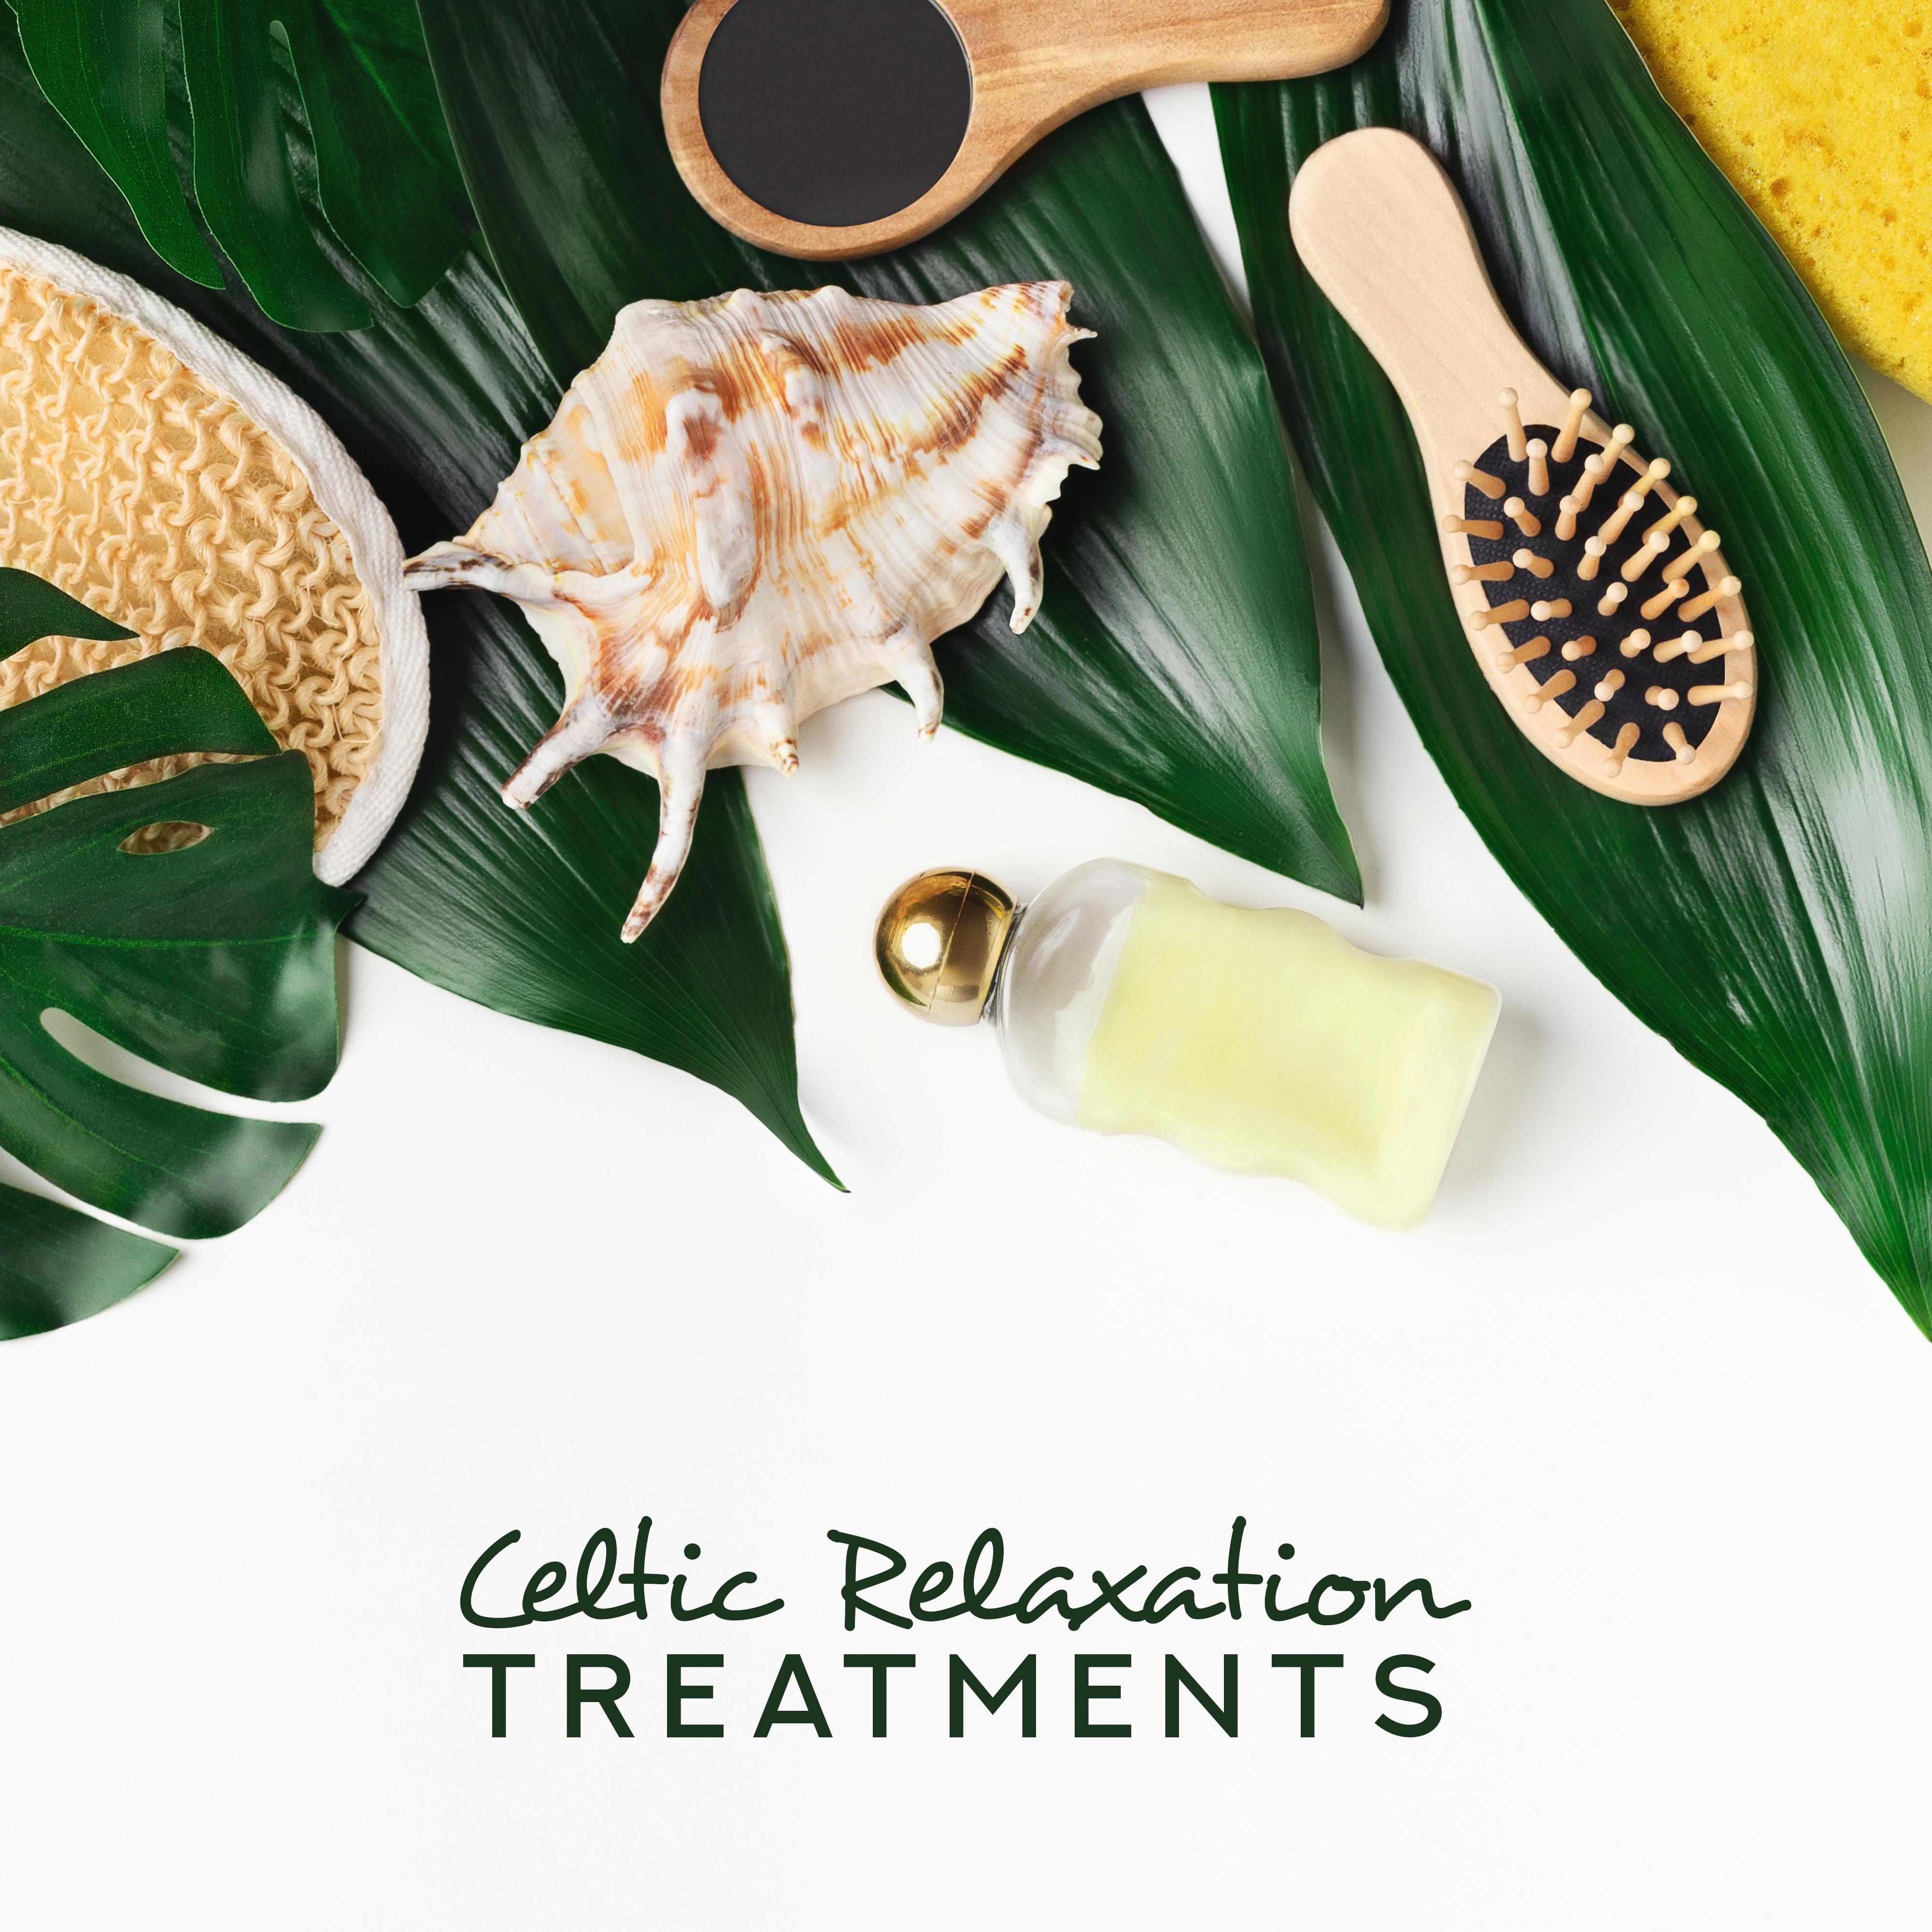 Celtic Relaxation Treatments - Best New Age Sounds for Relax, Spa, Massage, Sauna and Rest at Home